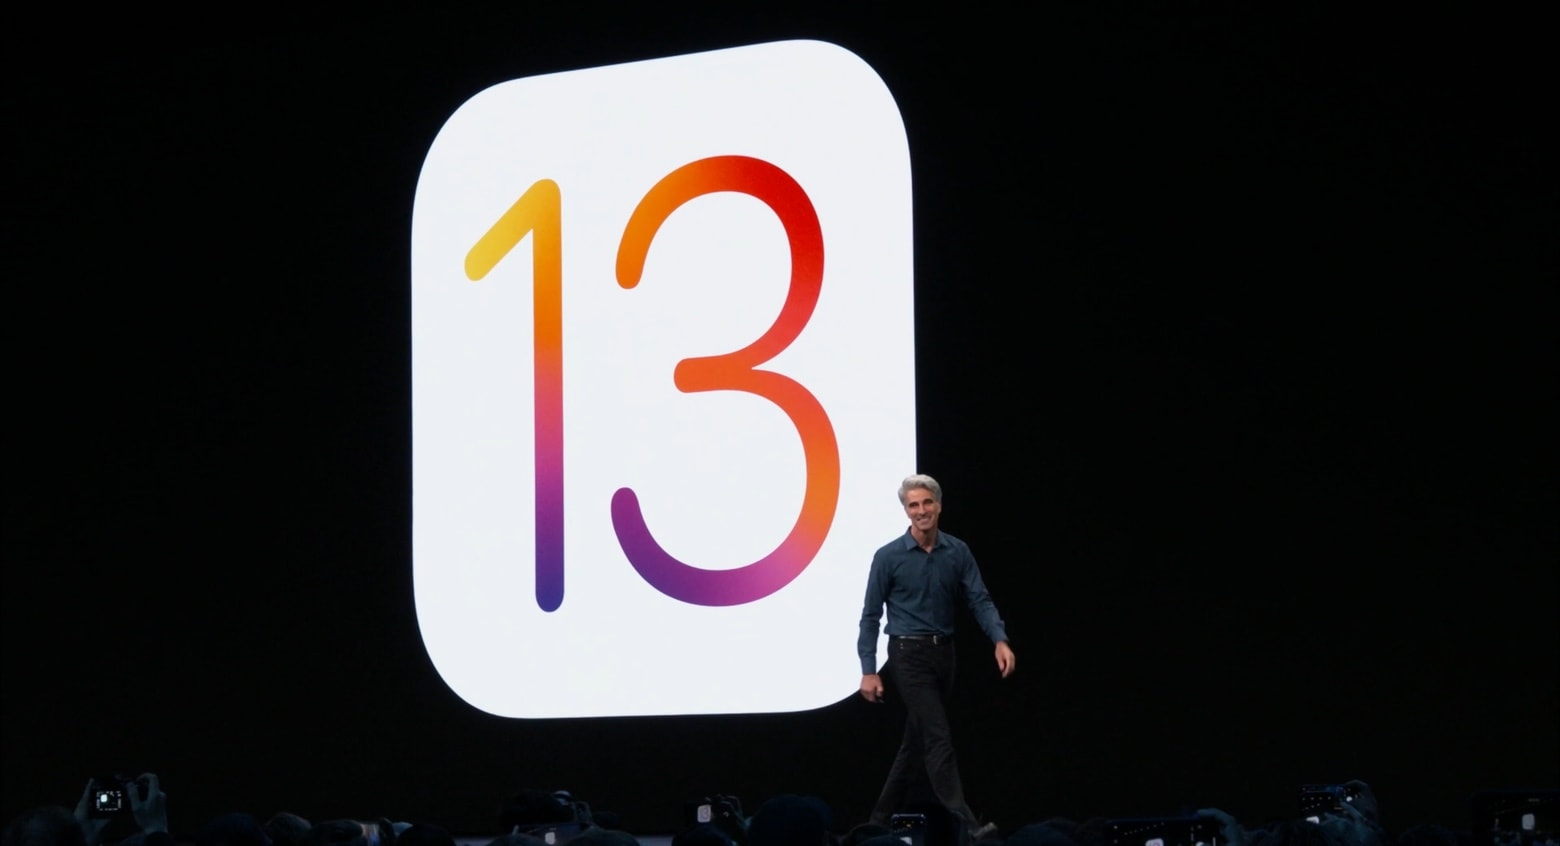 Buggy iOS 13 made Apple rethink how it develops software